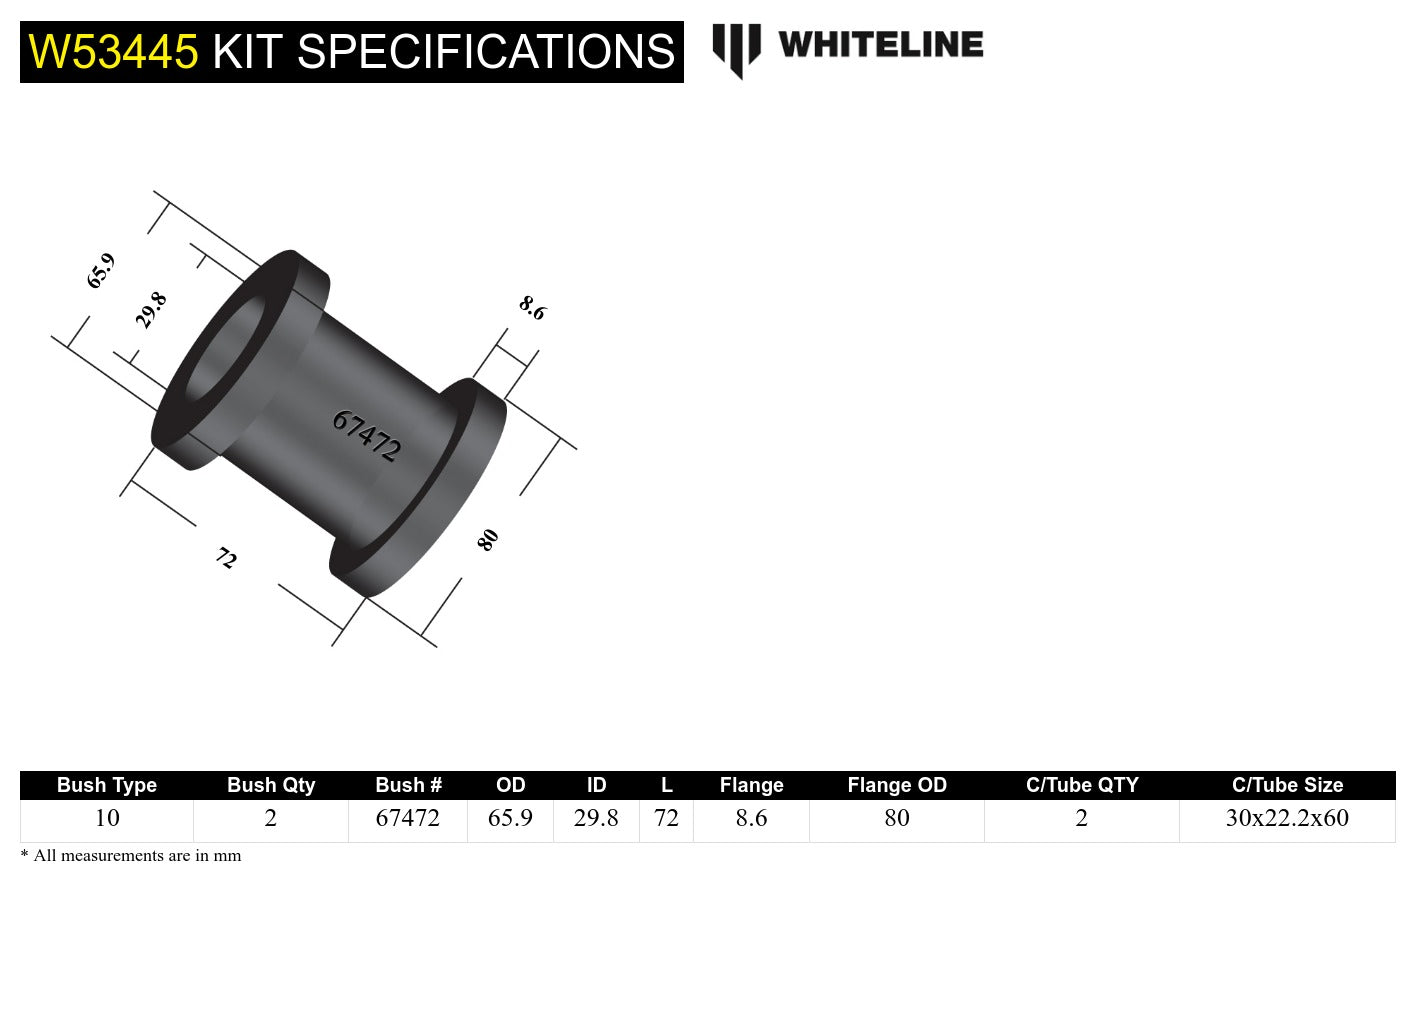 Front Control arm - lower inner rear bushing